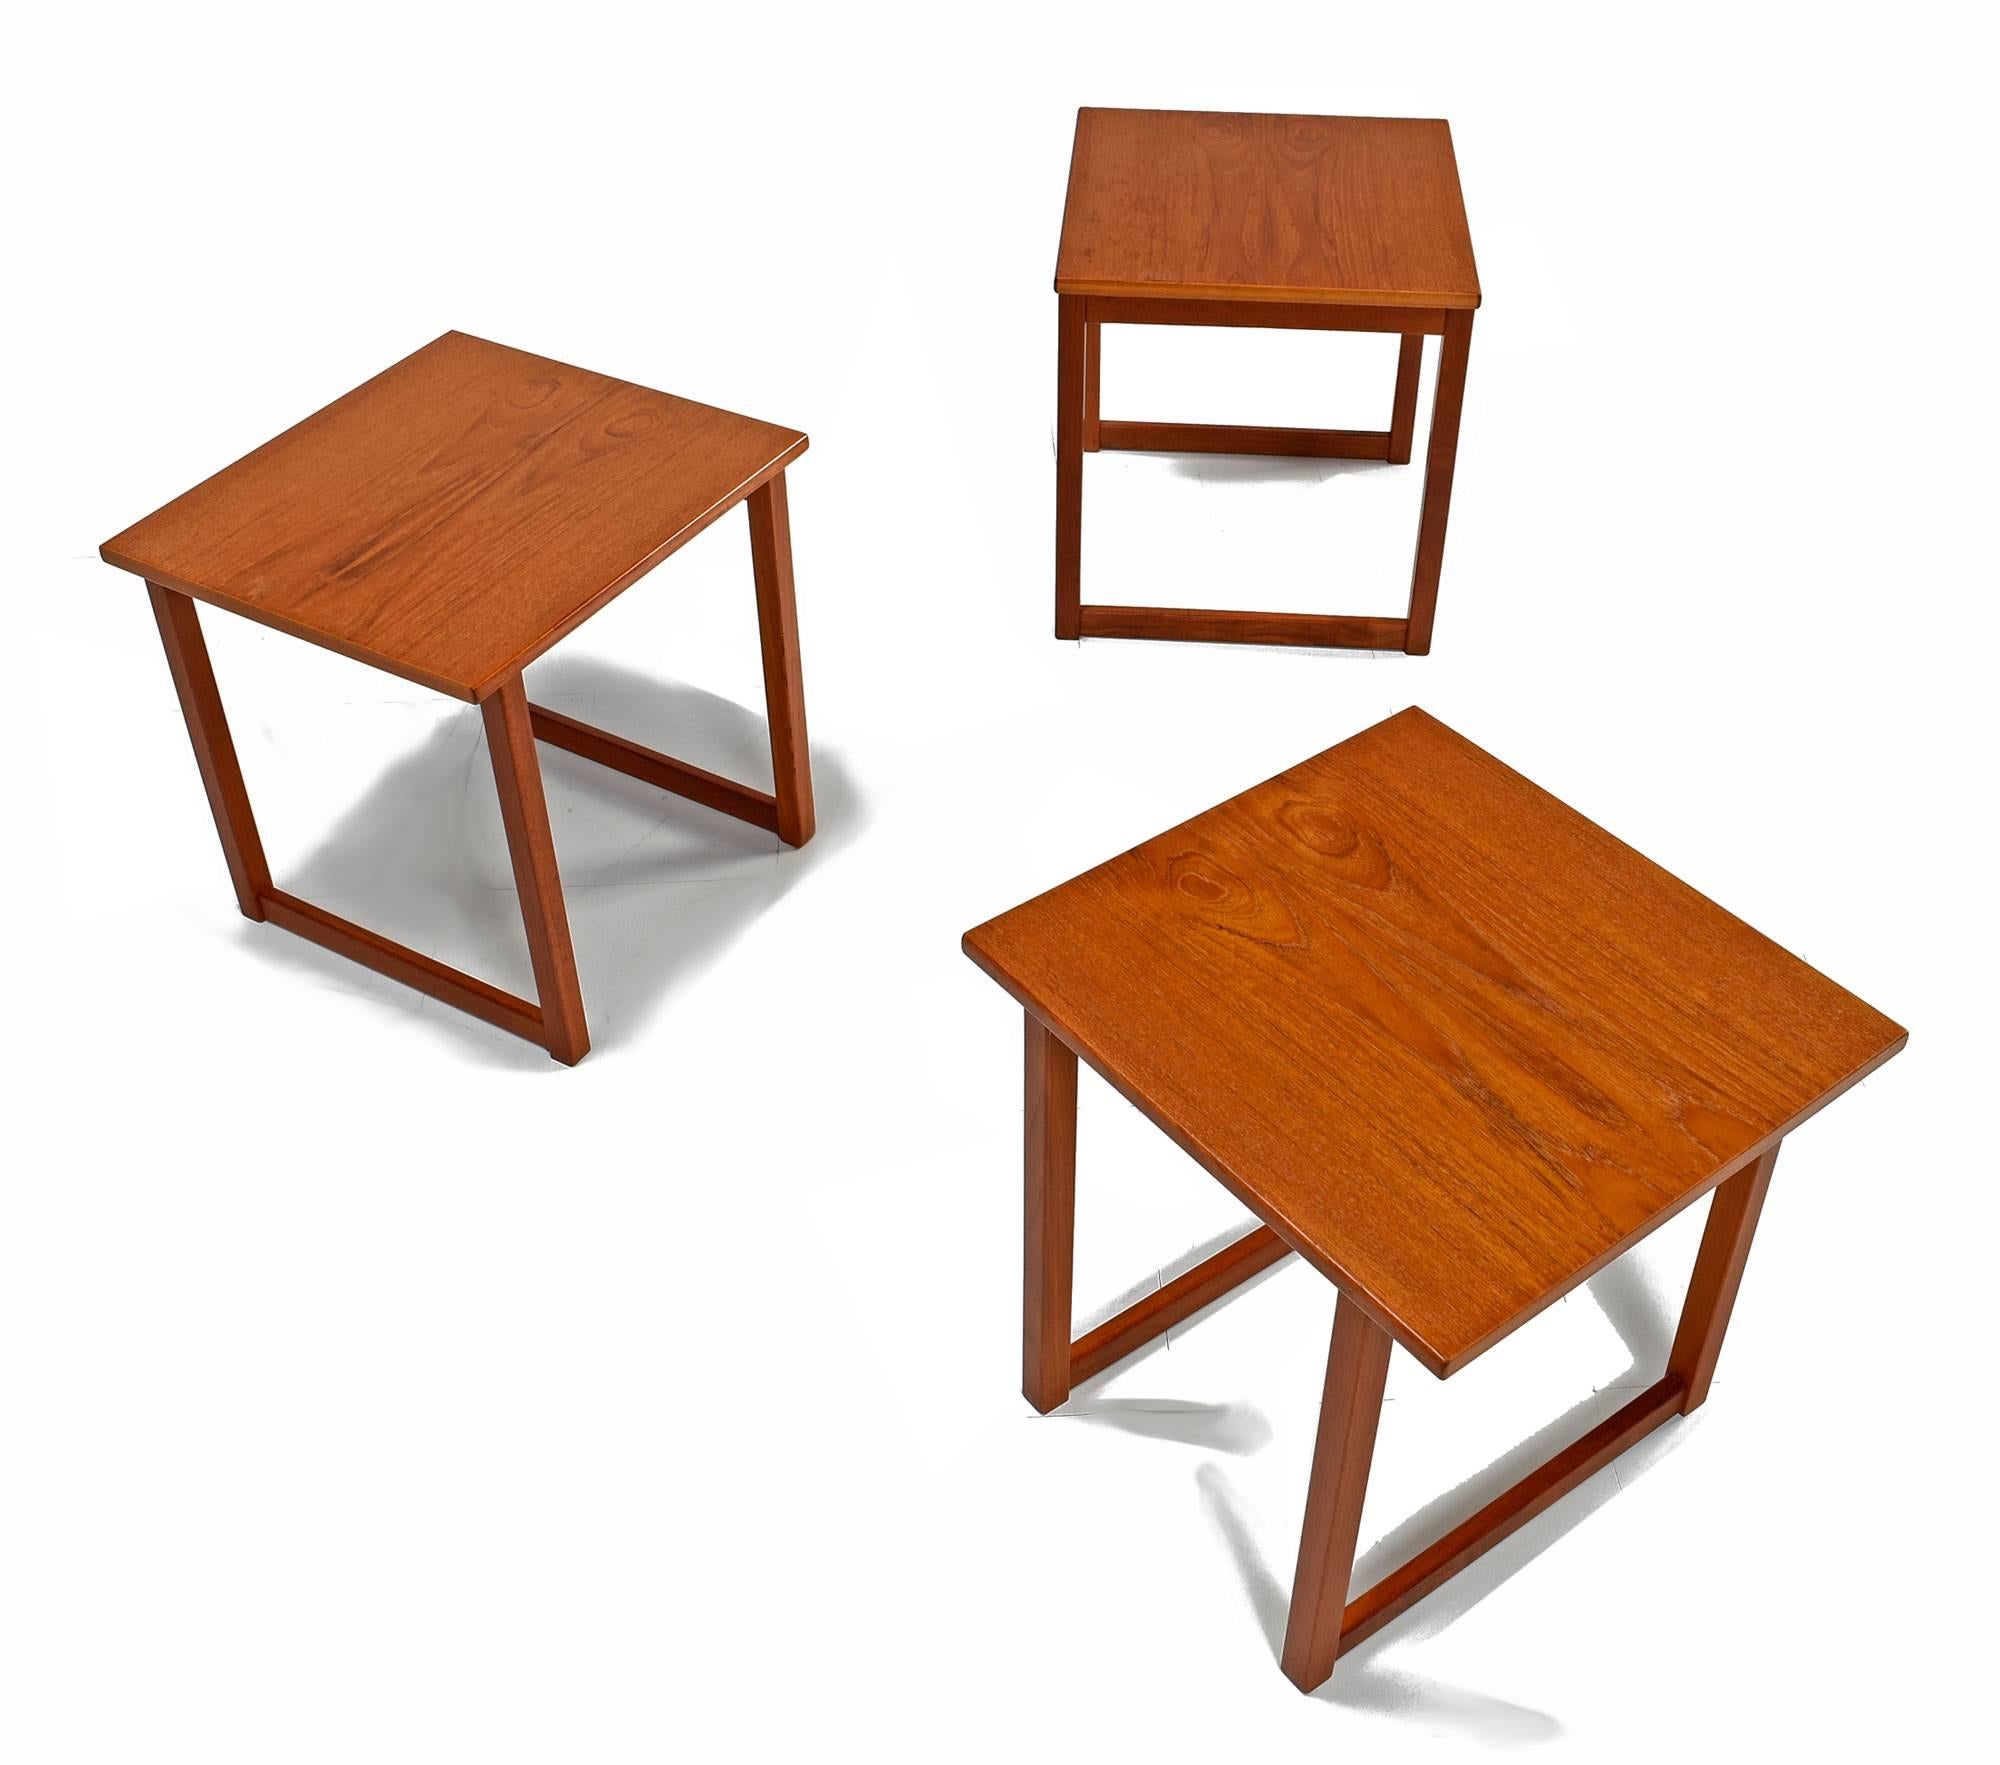 Scandinavian modern set of Kai Kristiansen "Cube" nesting tables. This handsome set contains three identical Danish teak tables which can be arranged in a variety of ways, making them multifunctional; they also stack together forming a